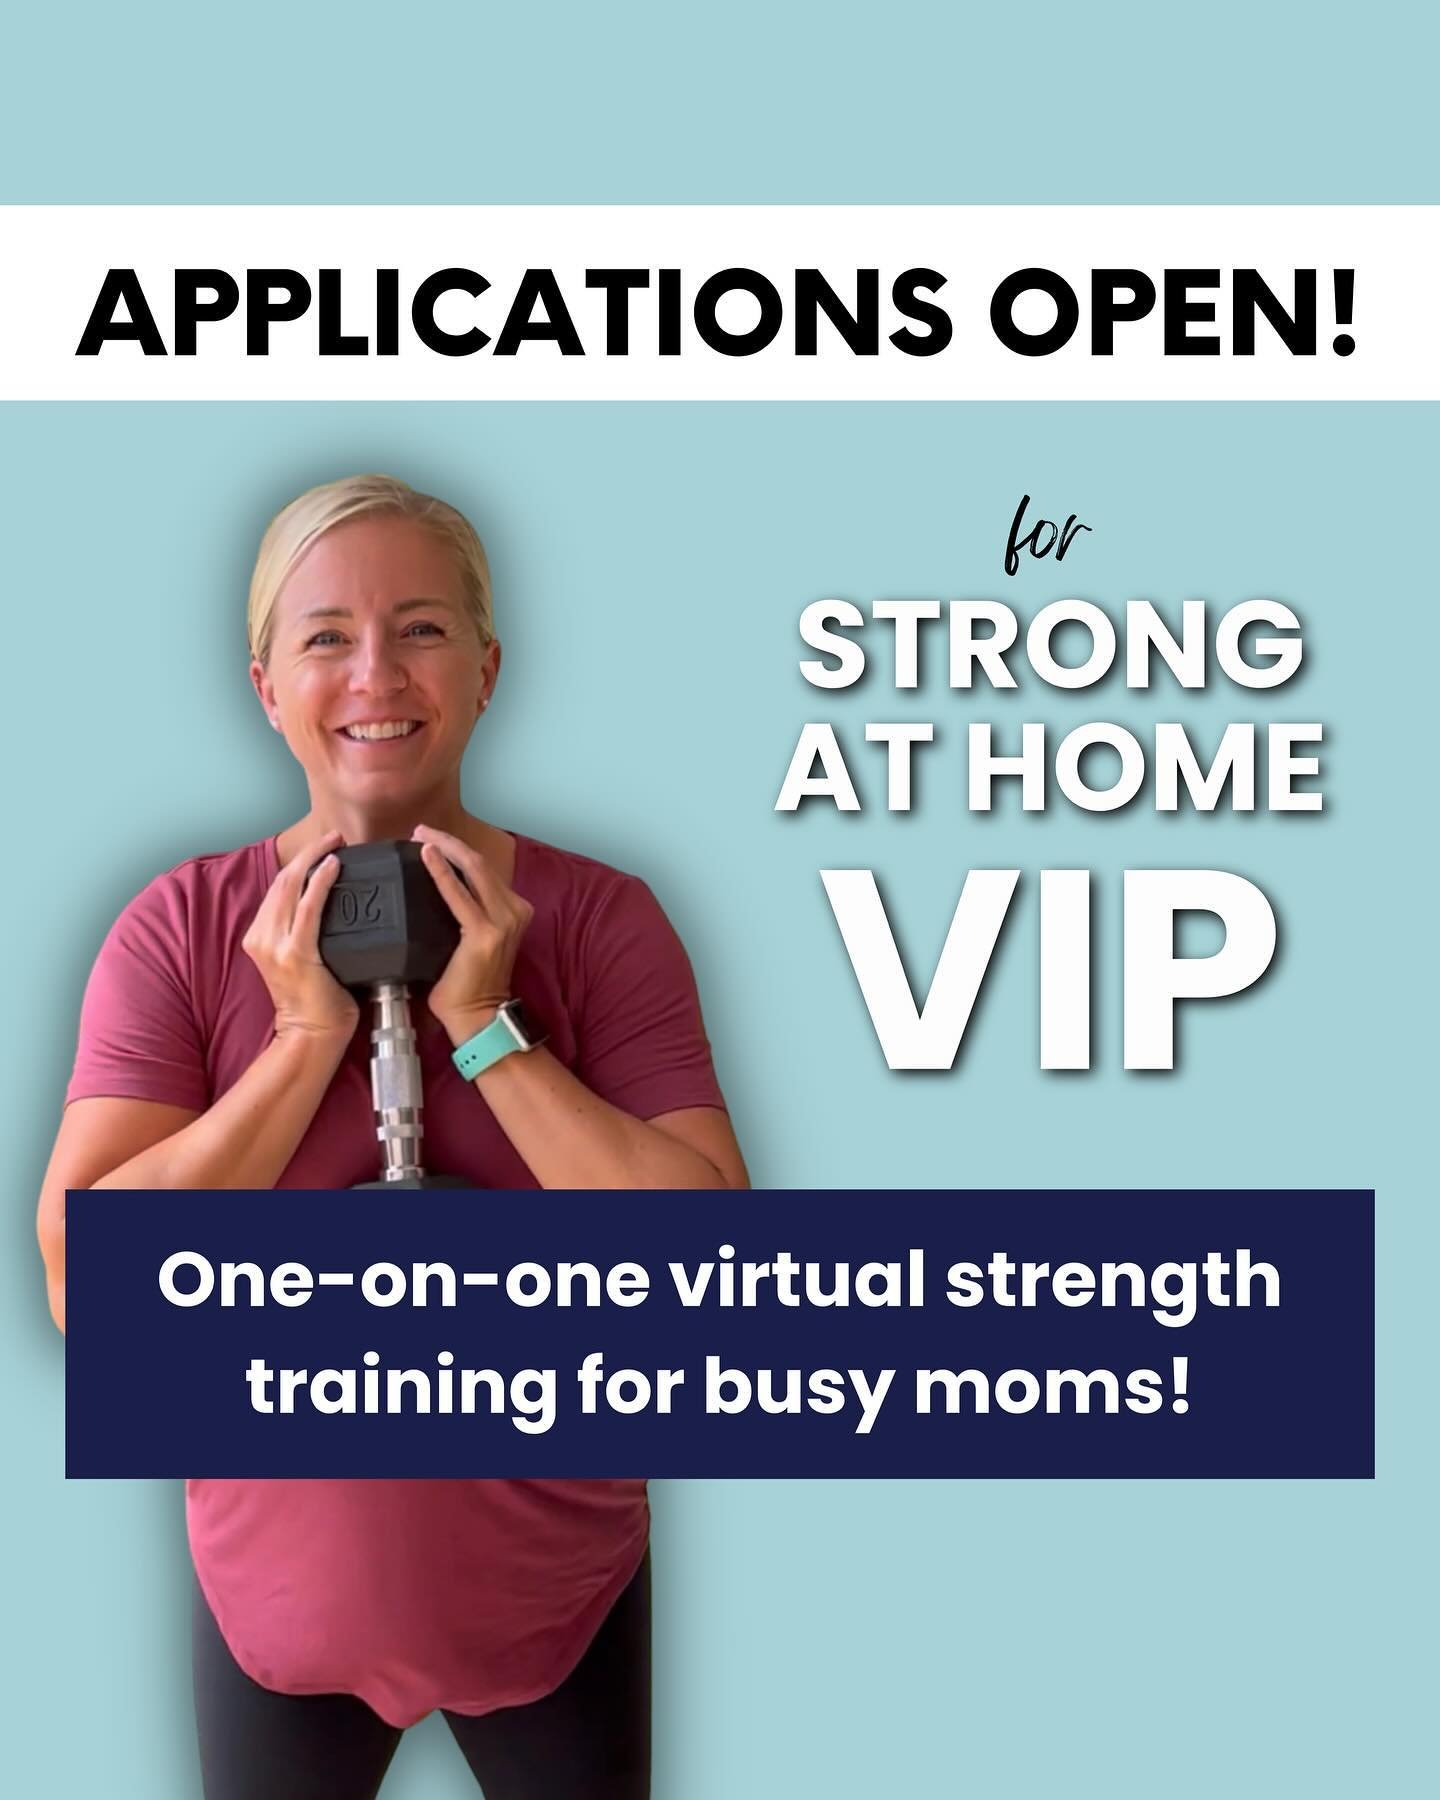 [APPLICATIONS OPEN FOR STRONG AT HOME VIP!] 

💪🏻 Strong at Home VIP is a one-on-one virtual strength training program for busy moms who want to get strong &amp; fit without leaving their house (with the accountability of weekly appointments)!

🔥 M